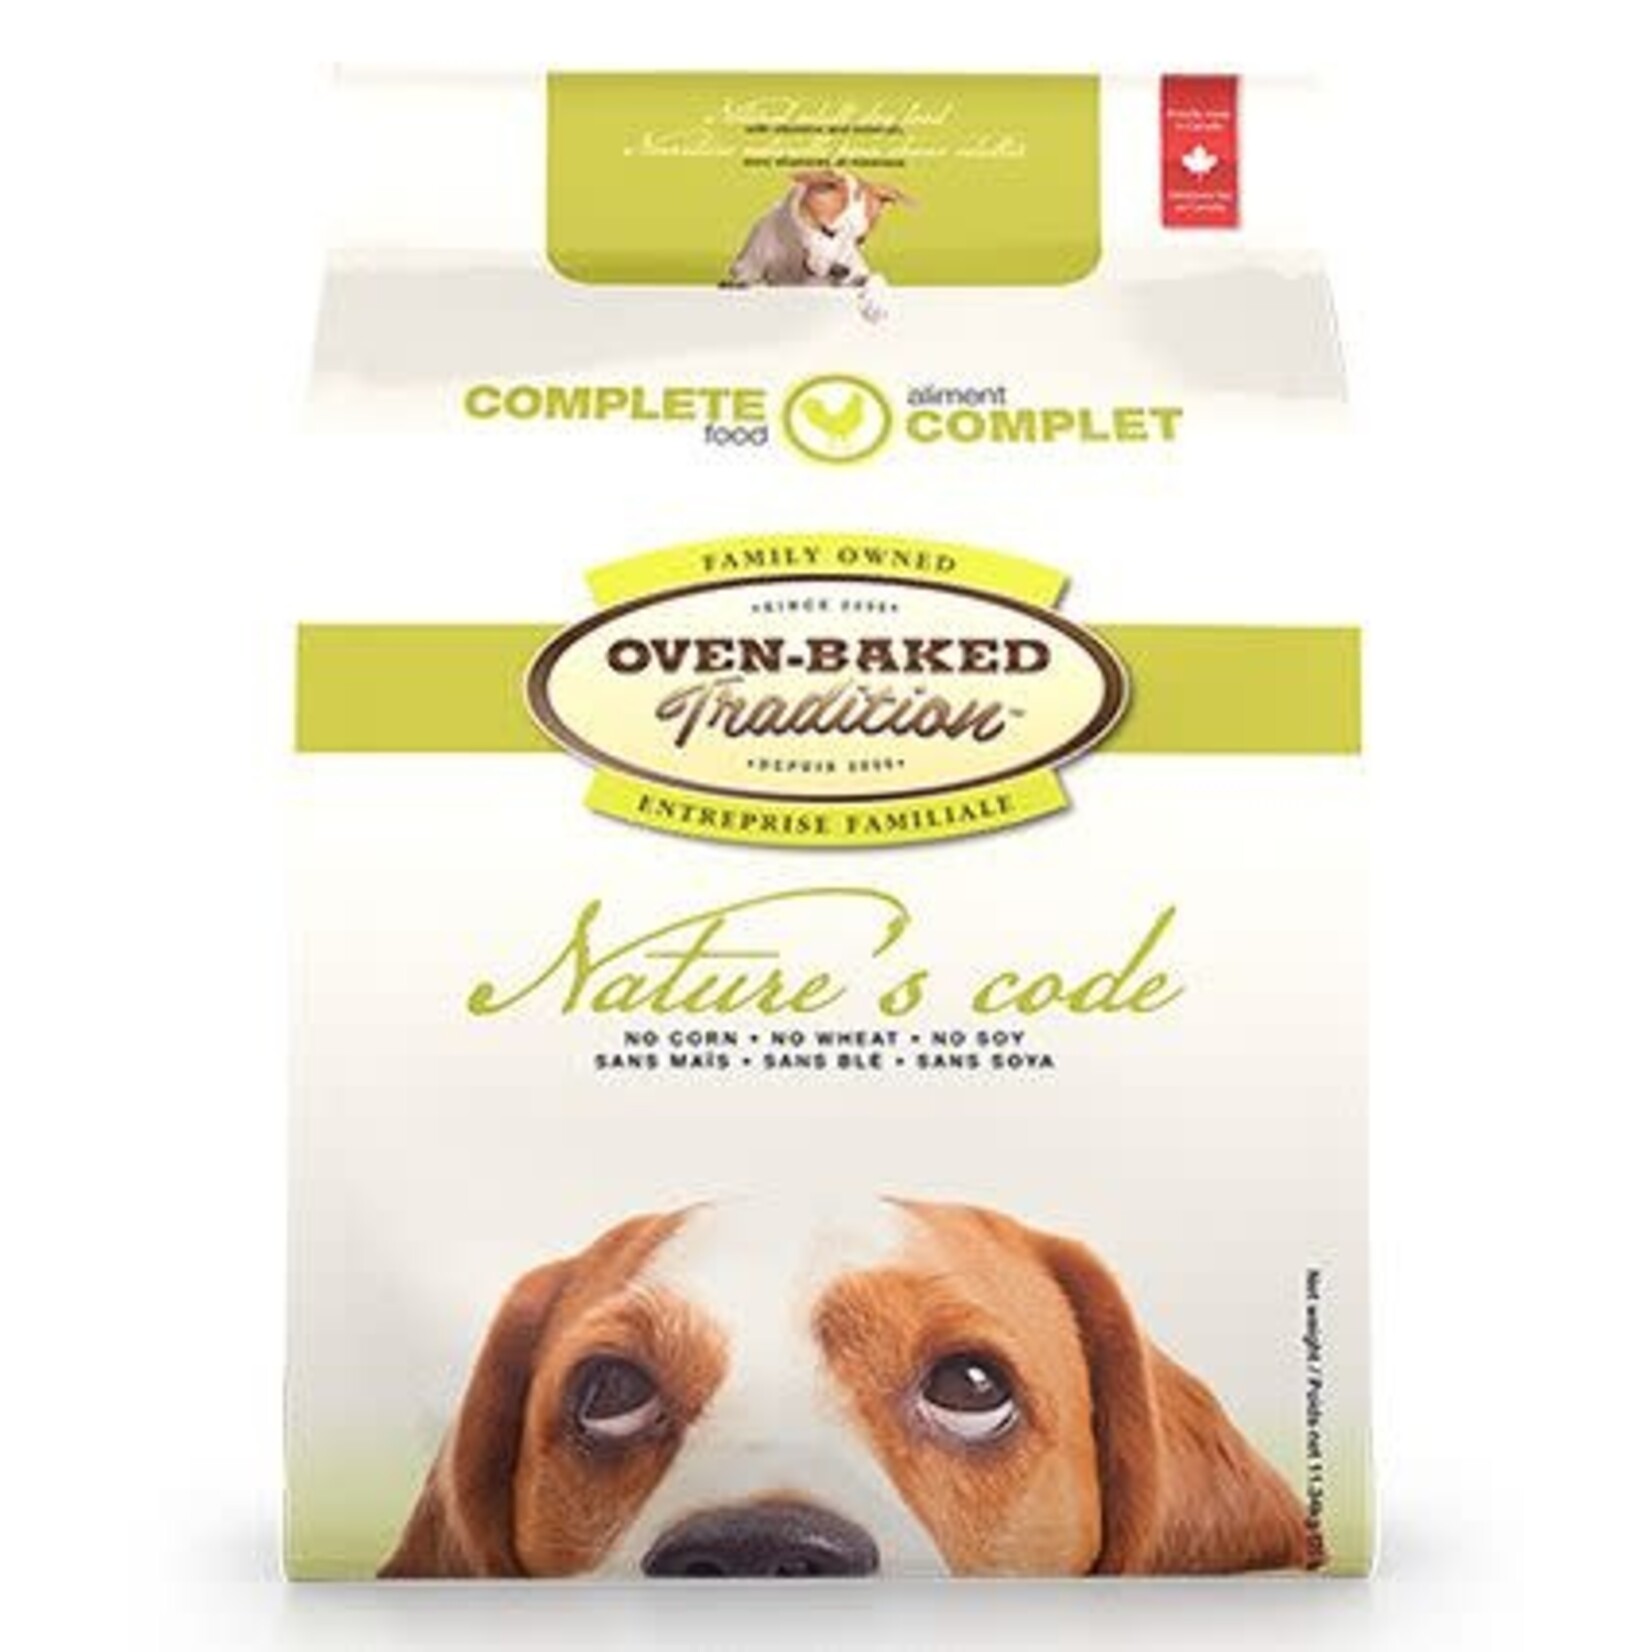 Oven-Baked Tradition Nature's Code Dog Food